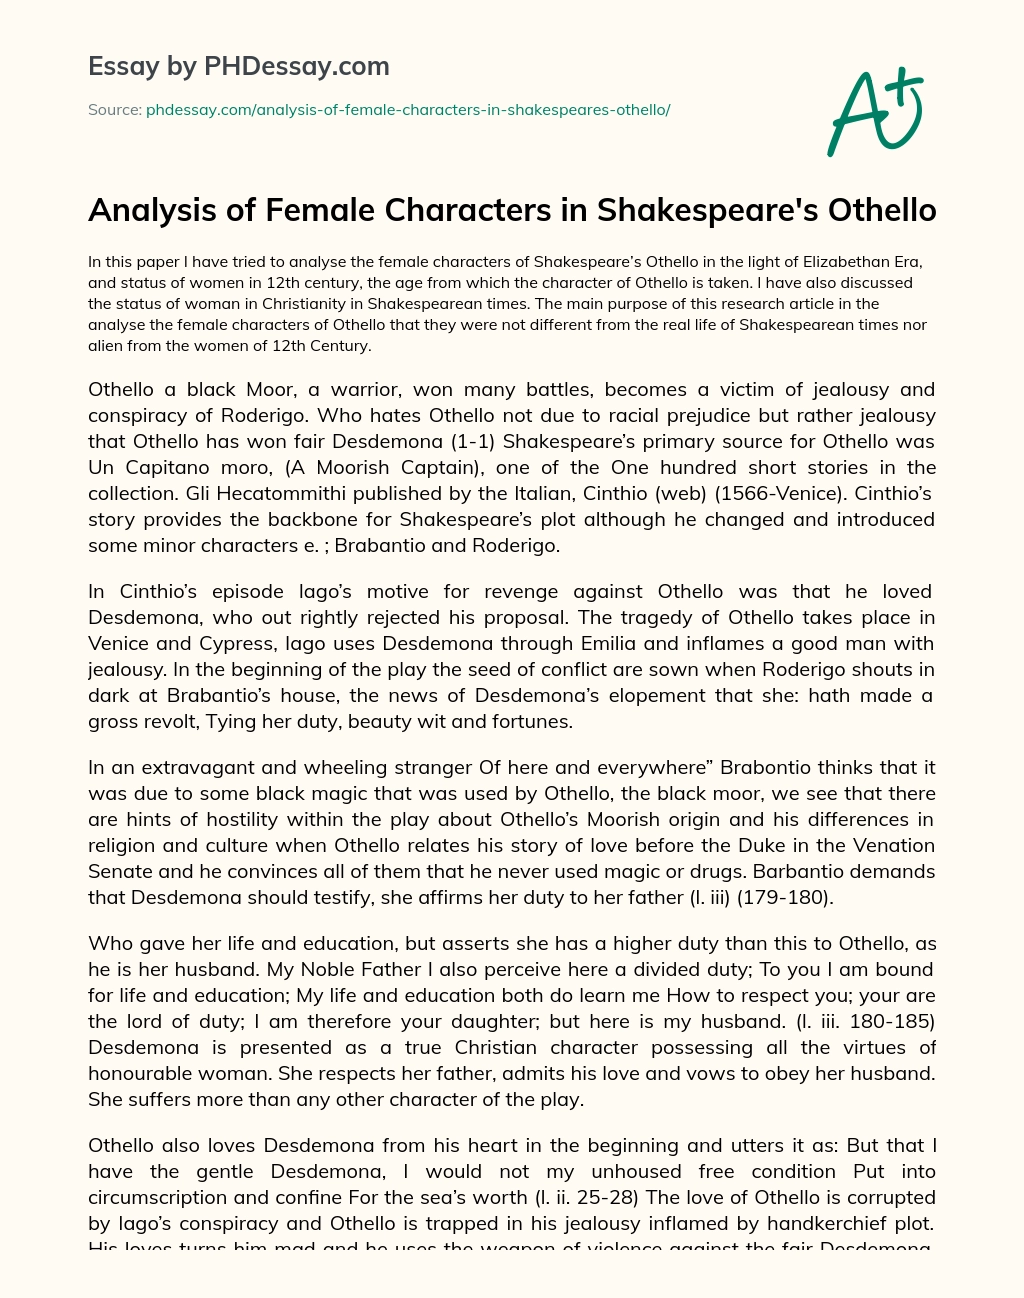 Analysis of Female Characters in Shakespeare’s Othello essay